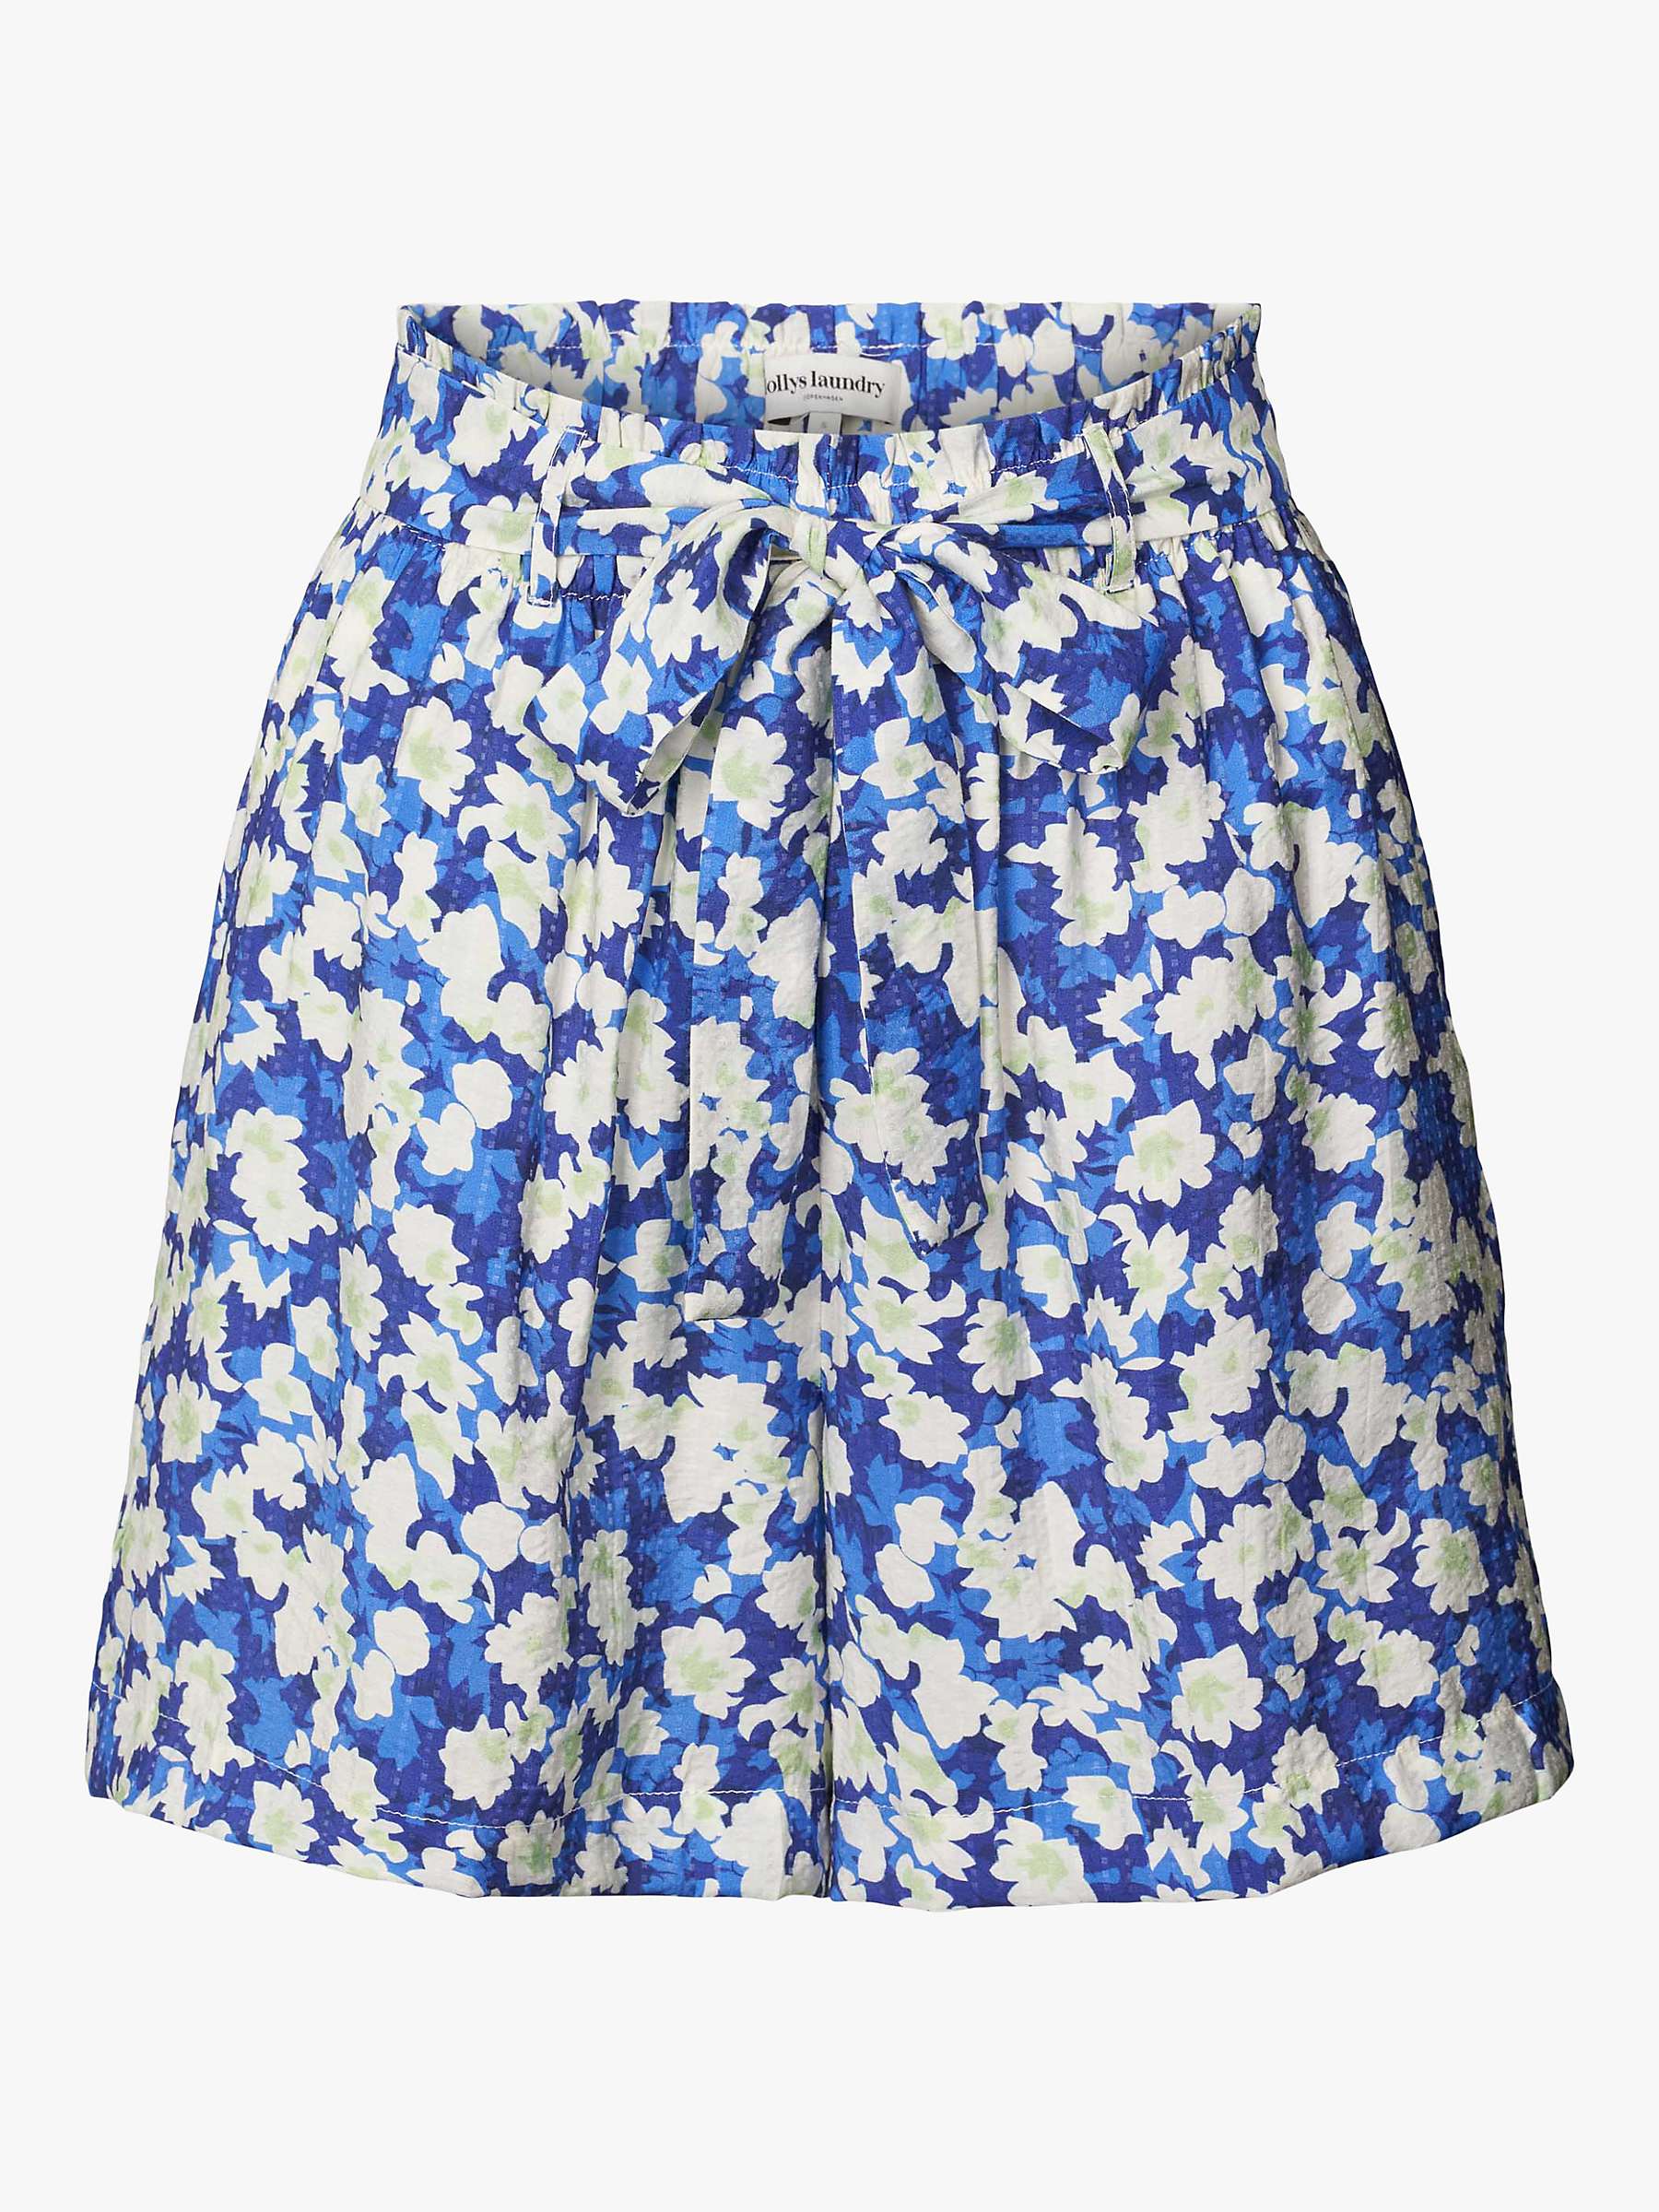 Lollys Laundry Blanca Floral Shorts, Blue at John Lewis & Partners